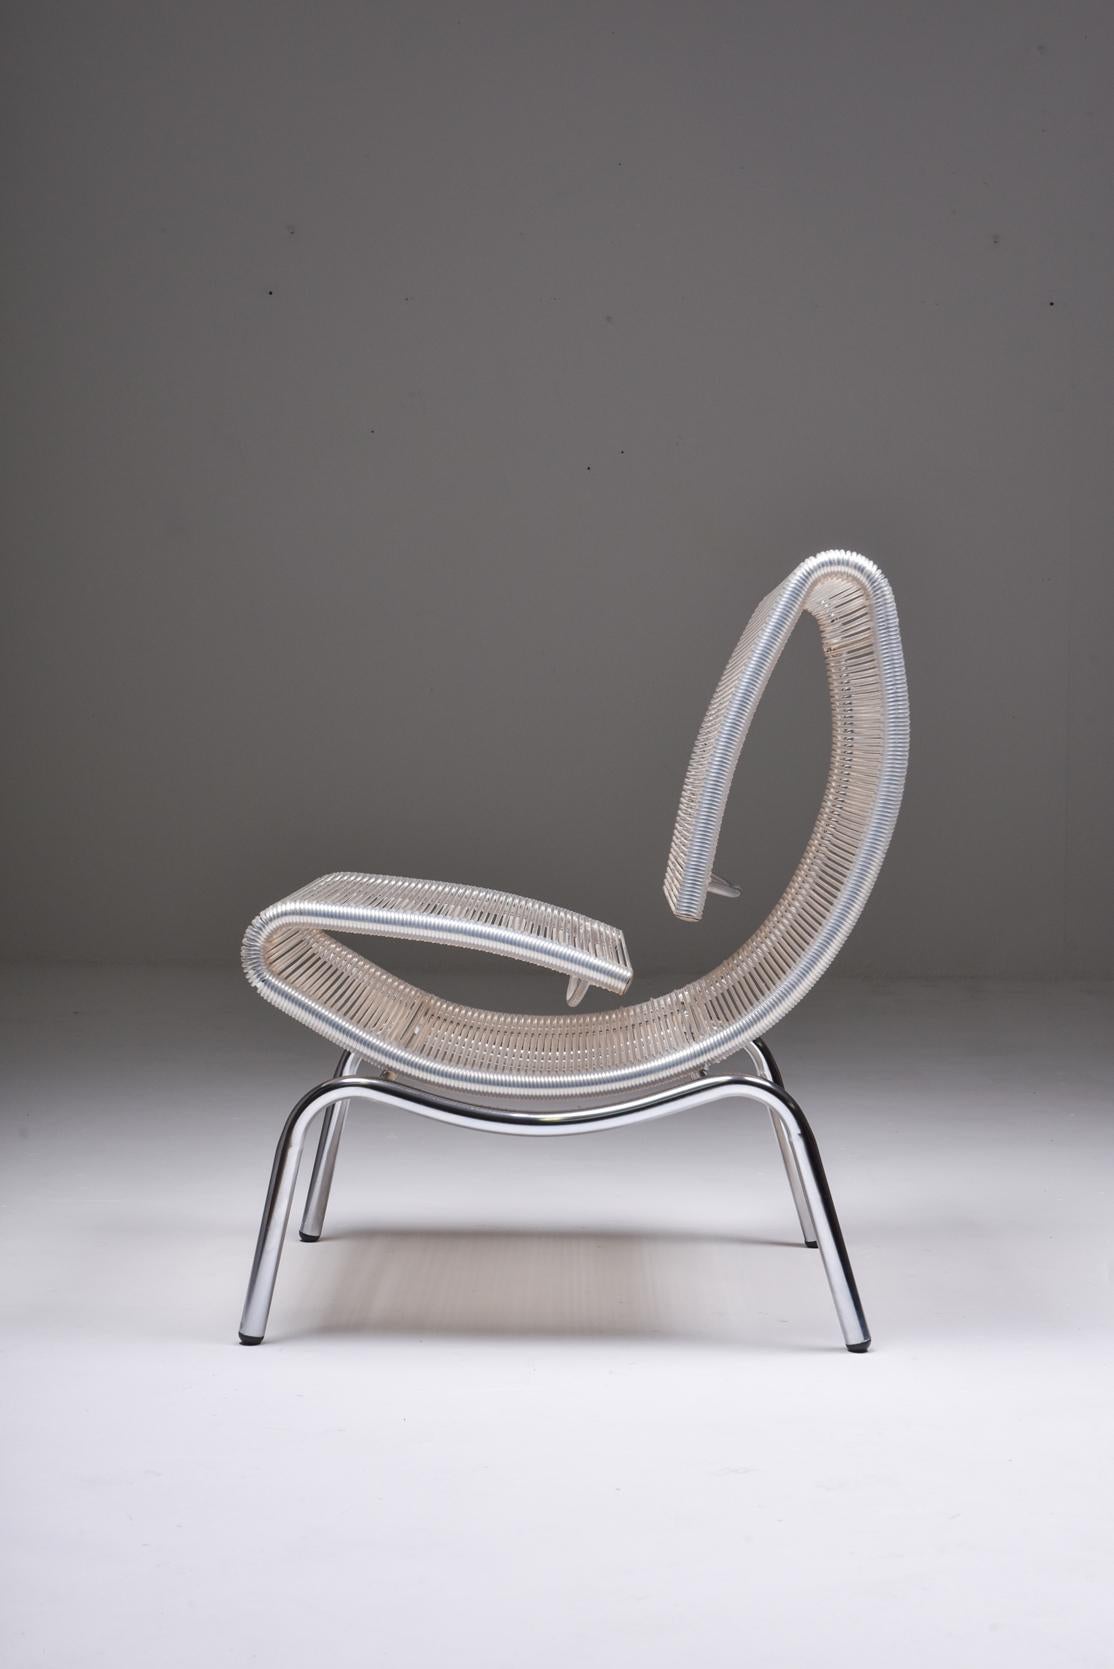 Post-Modern Pair of Easy Chairs in Chrome & Plastic Wire, 1960s For Sale 8